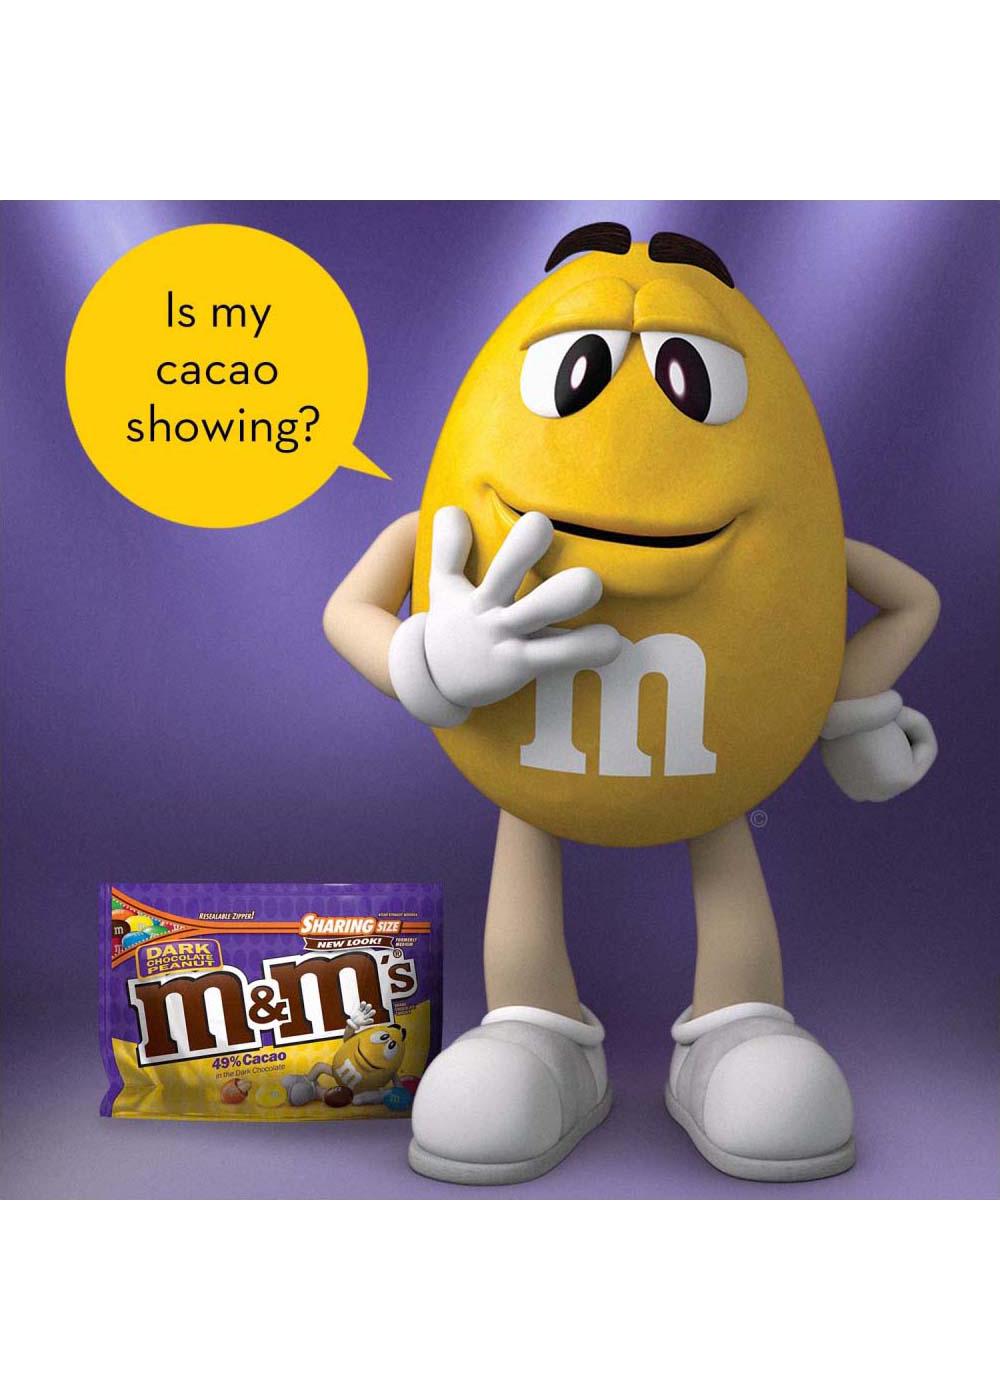 Calories in M&M's Dark Chocolate Peanut M&M's and Nutrition Facts